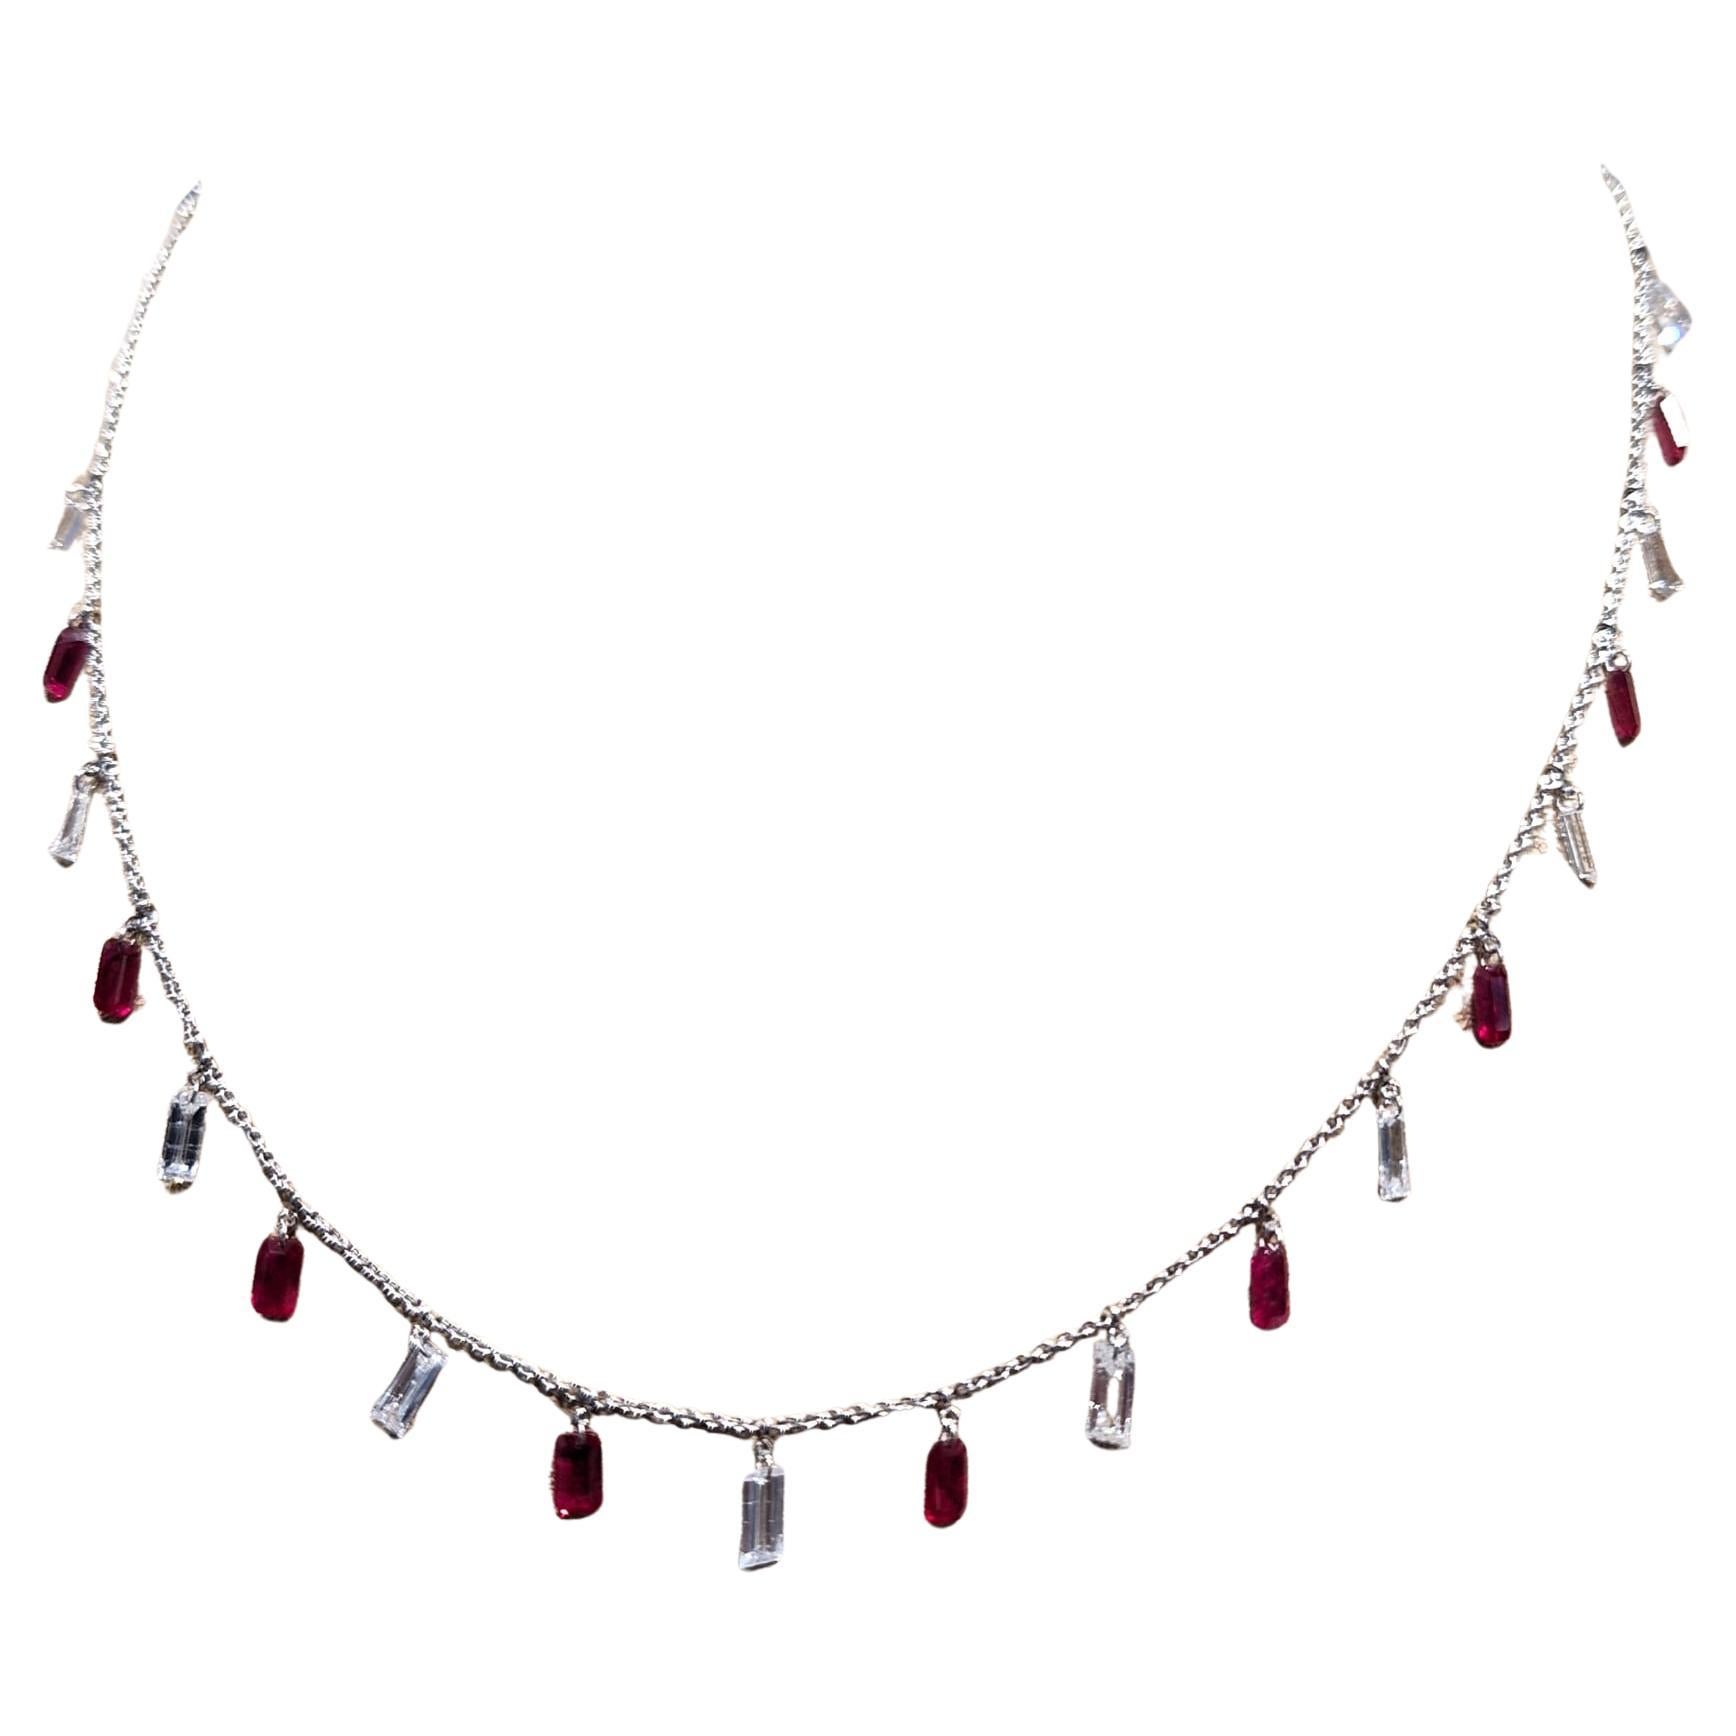 18K White Gold Diamond Necklace with Ruby